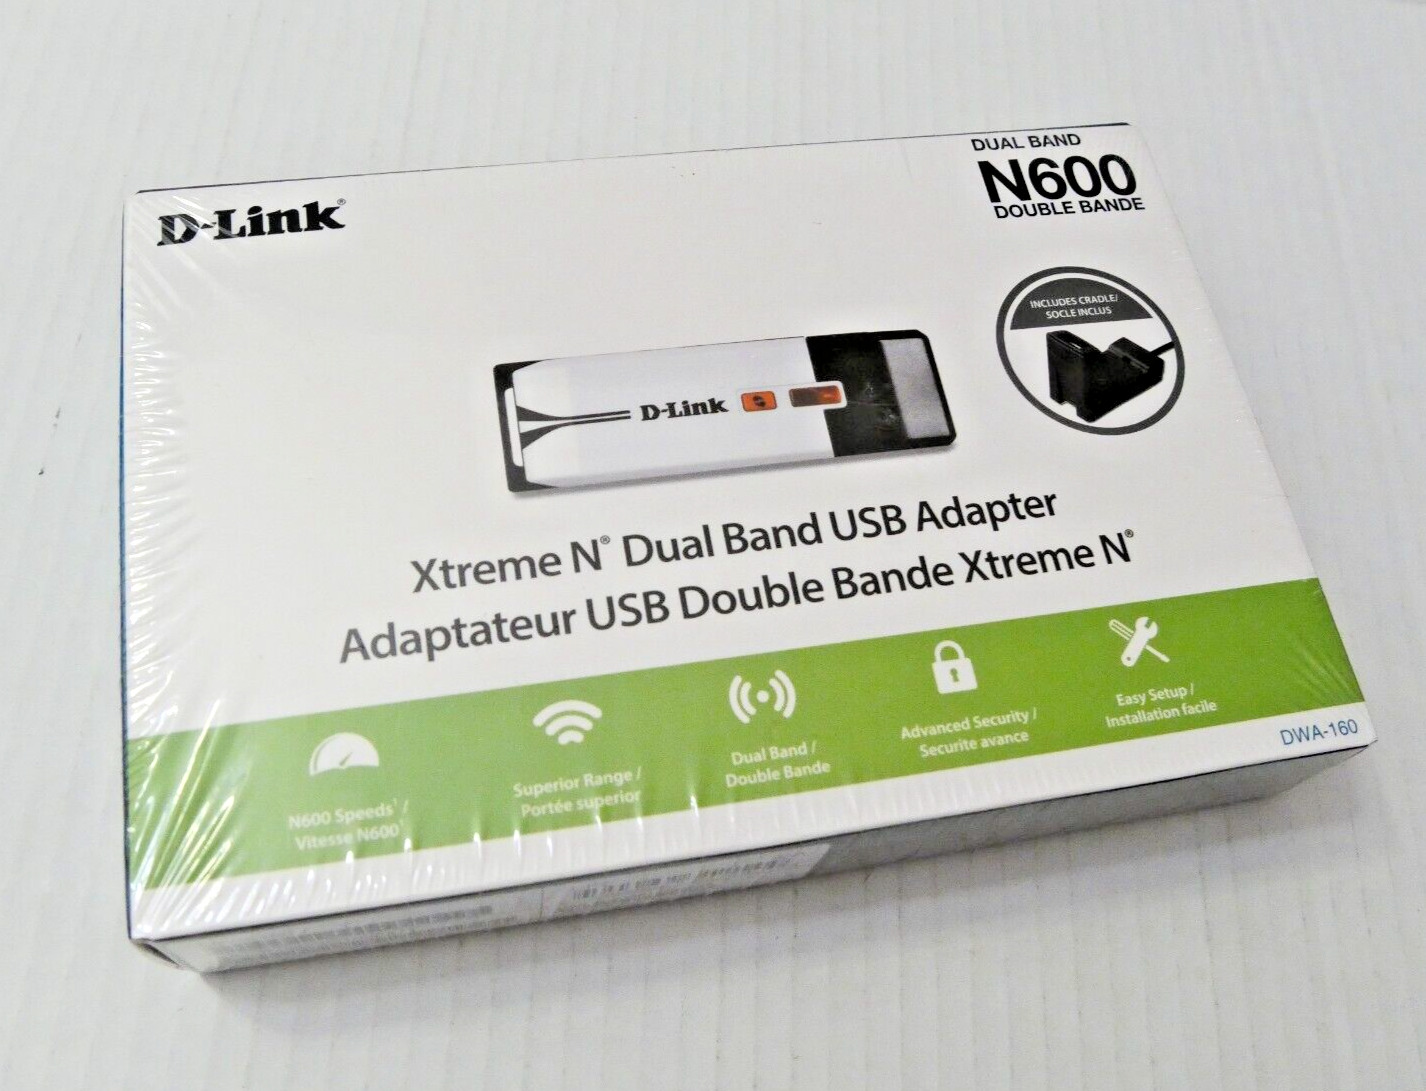 D-Link Wireless Dual Band USB Adapter N300 DWA-160 New in Box Sealed